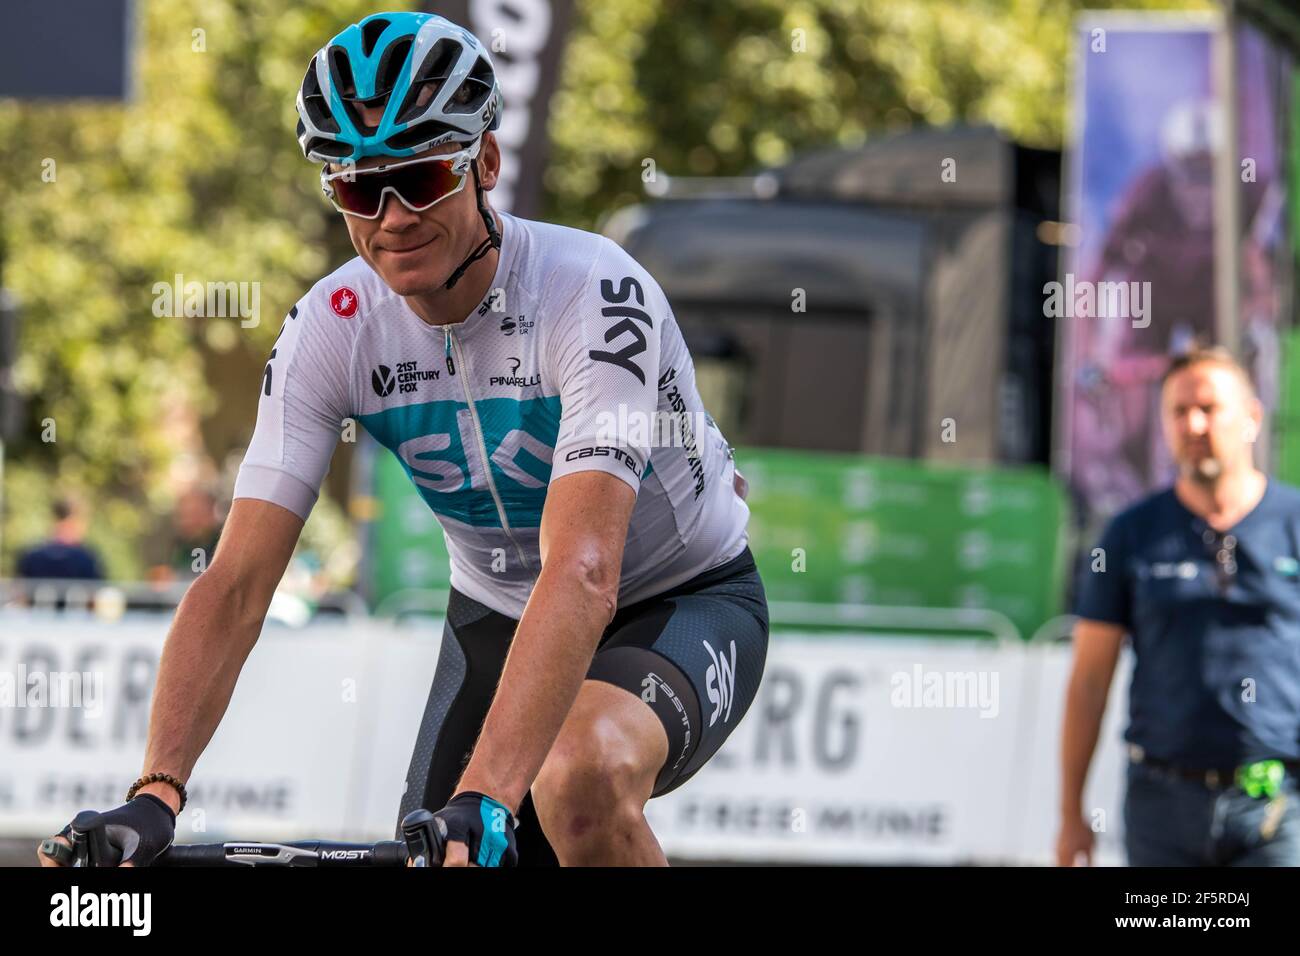 Chris Froome of Team Sky before stage 8 of OVO Energy Tour of Britain 2018, London - 09/09/2018. Credit: Jon Wallace Stock Photo